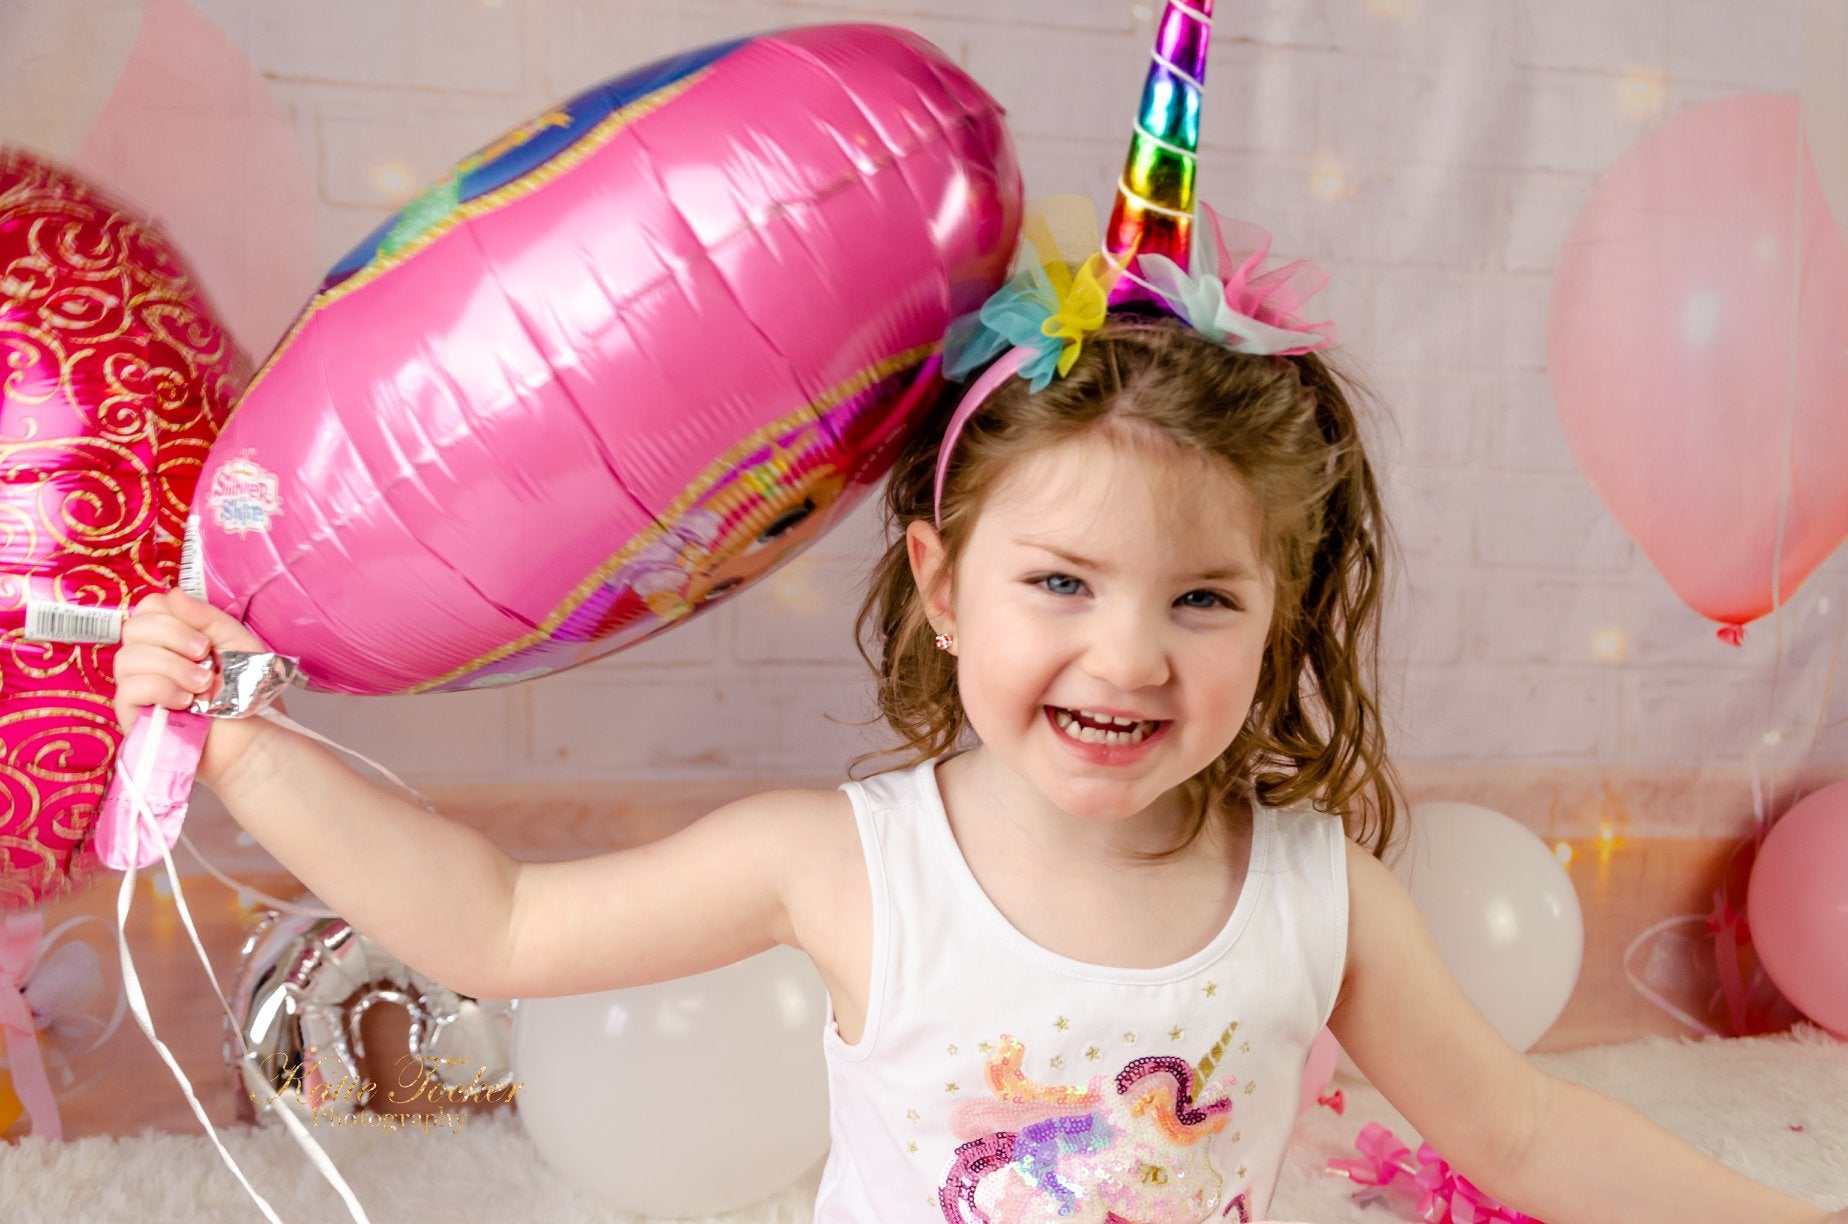 Kate White Brick Wall Pink Balloons and Decorations Girl Birthday Backdrop for cake smash